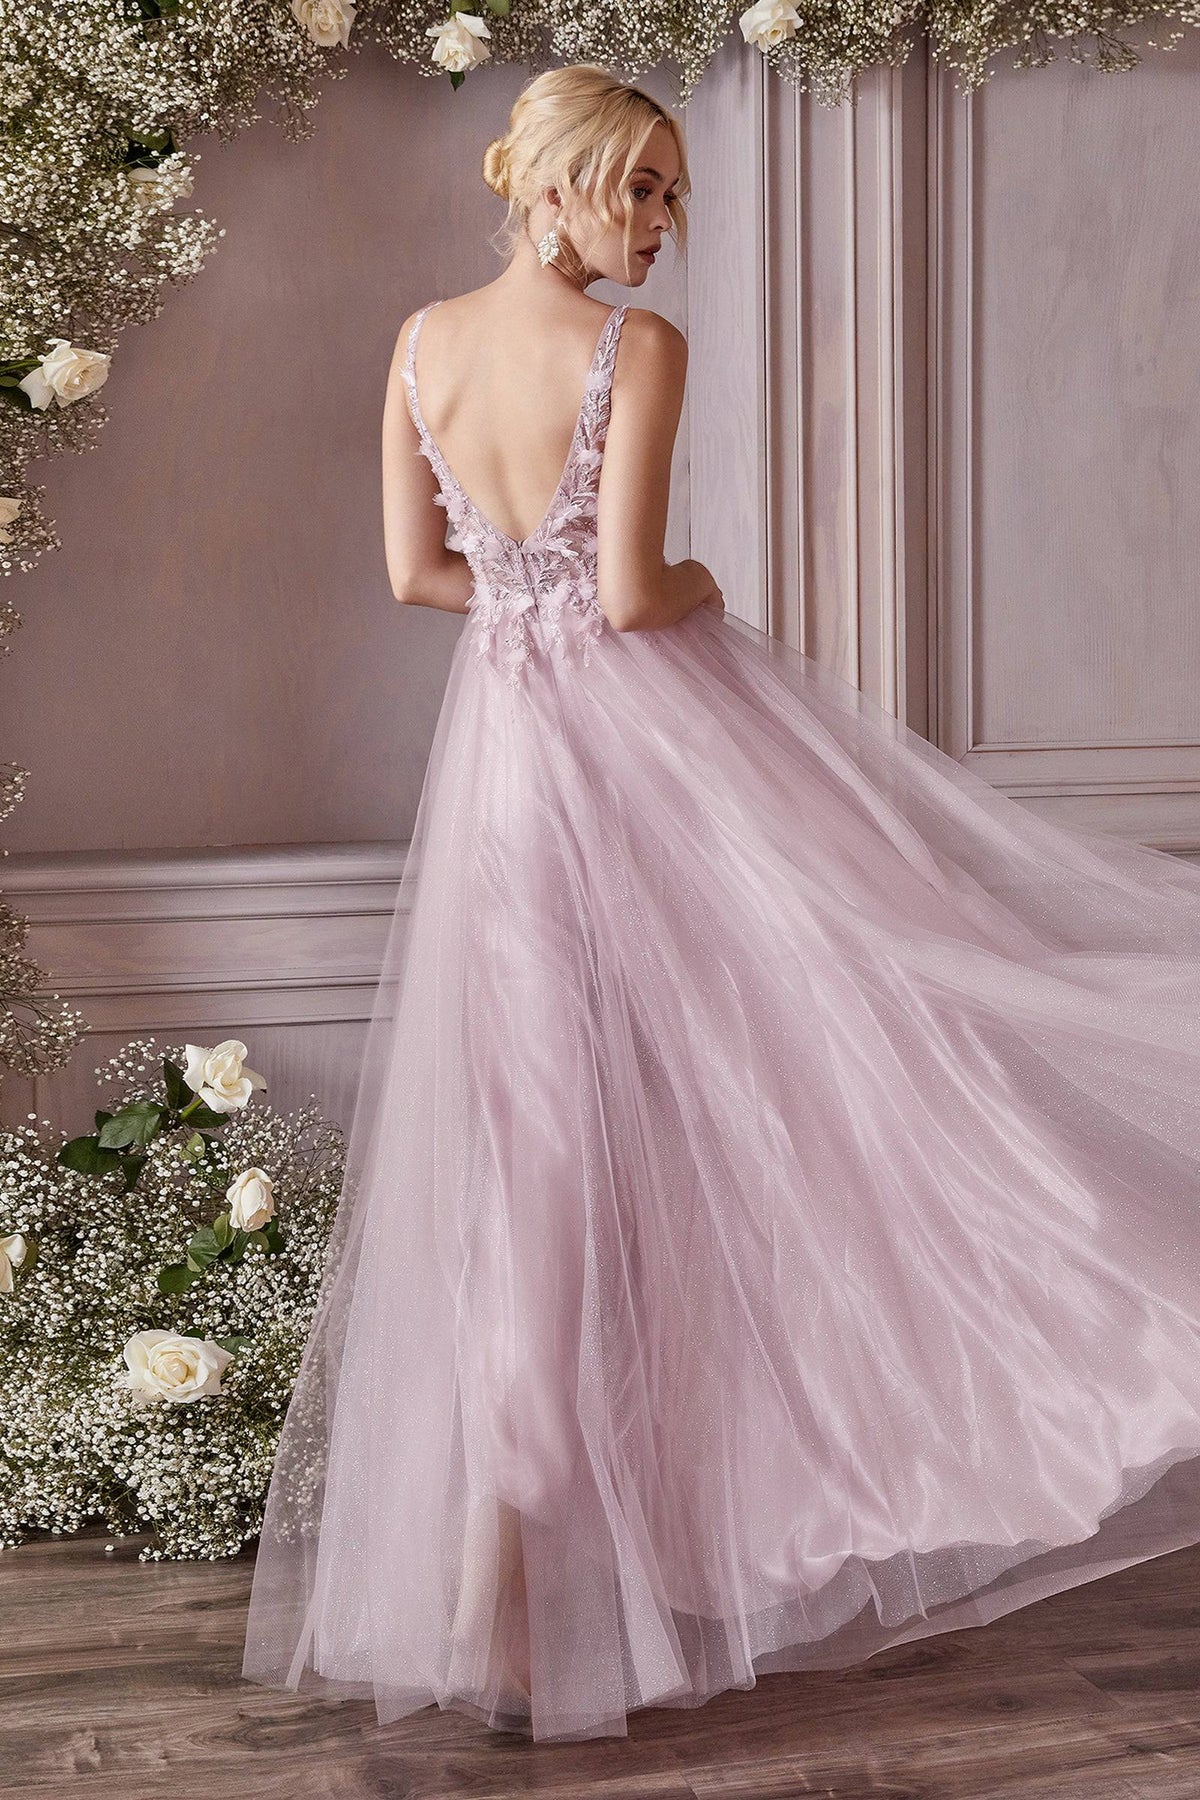 Cute Long Gown with Floral Accents and Layered Skirt #CDCD0181 - NORMA REED